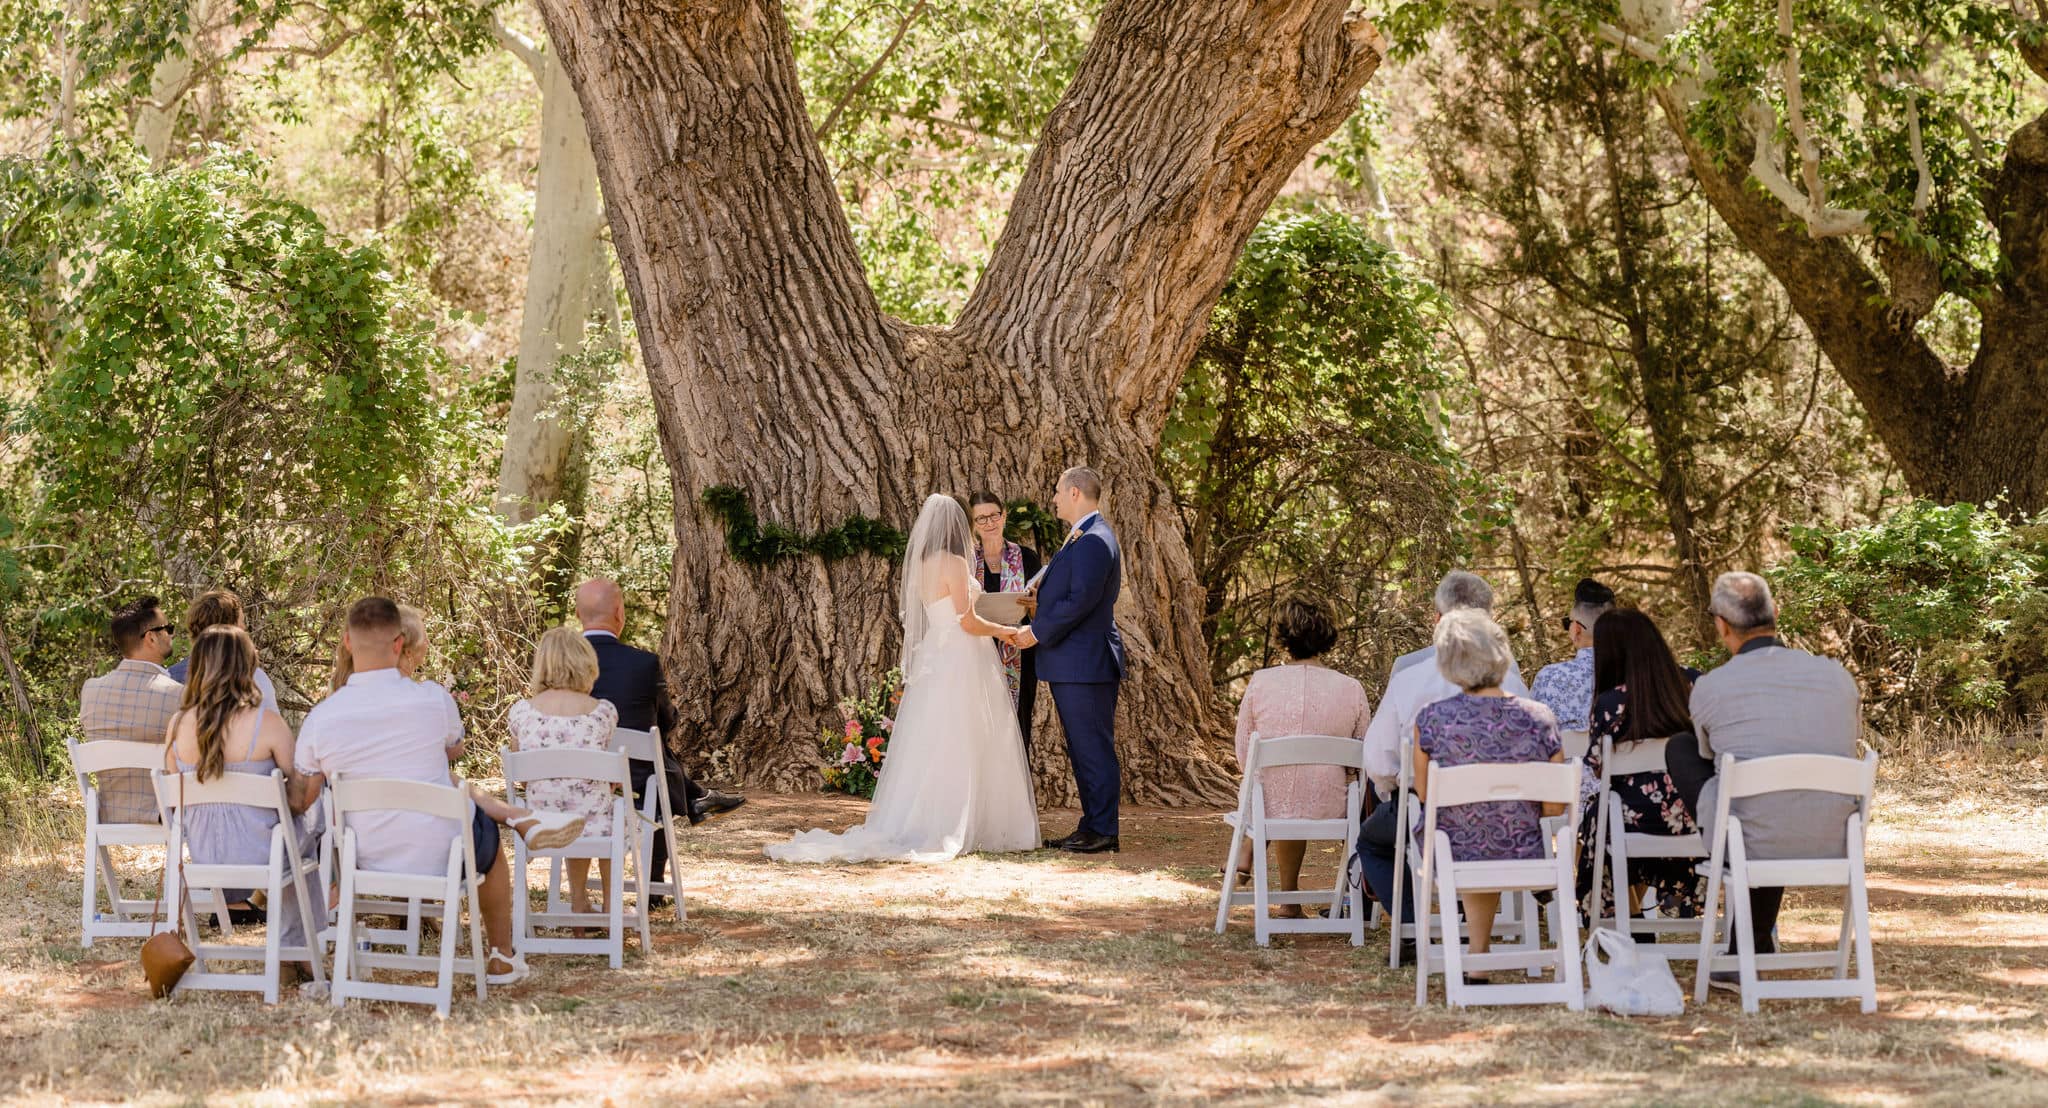 couple marries under tree based on the answer to how much does it cost to elope